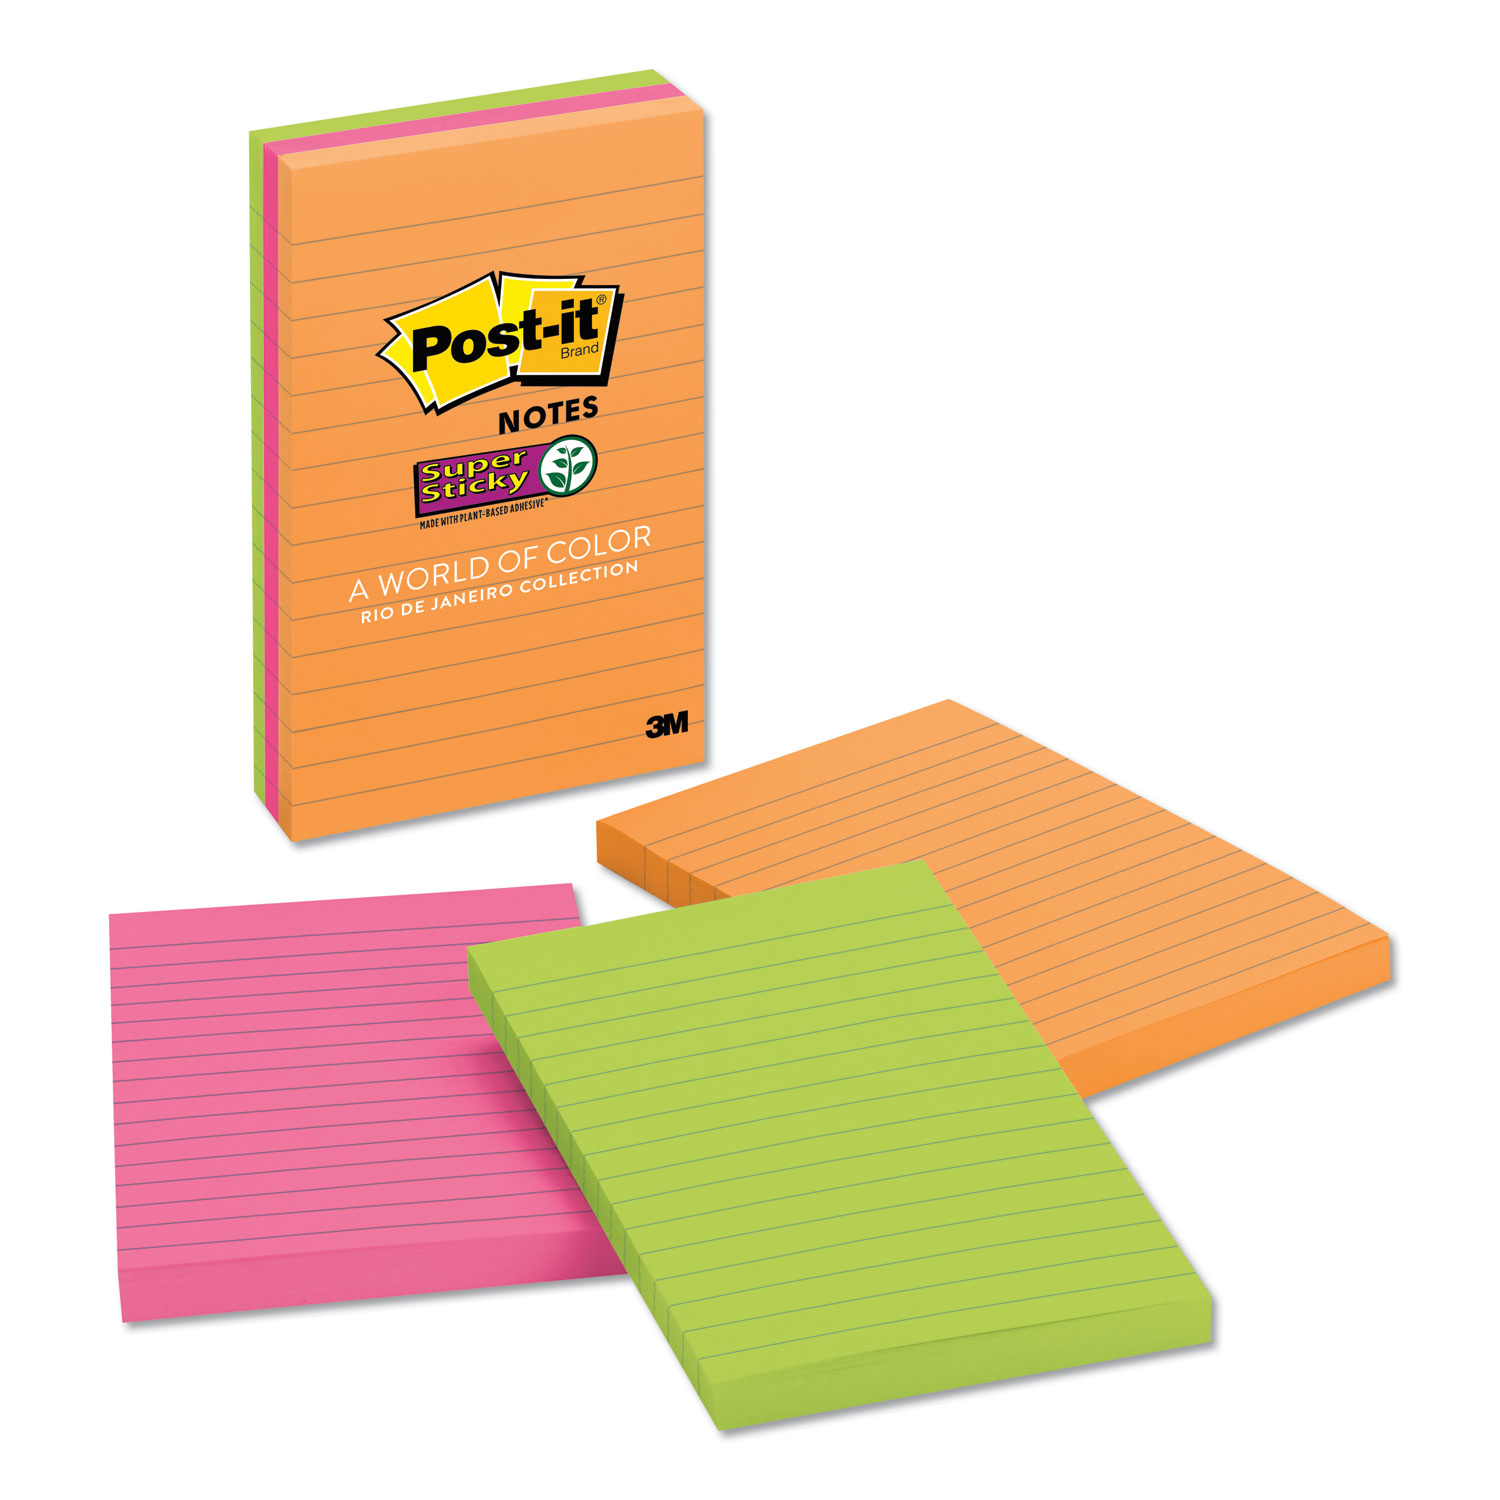  Post-it Notes Super Sticky 660-3SSUC Pads in Rio de Janeiro Colors, Lined, 4 x 6, 90-Sheet Pads, 3/Pack (MMM6603SSUC) 